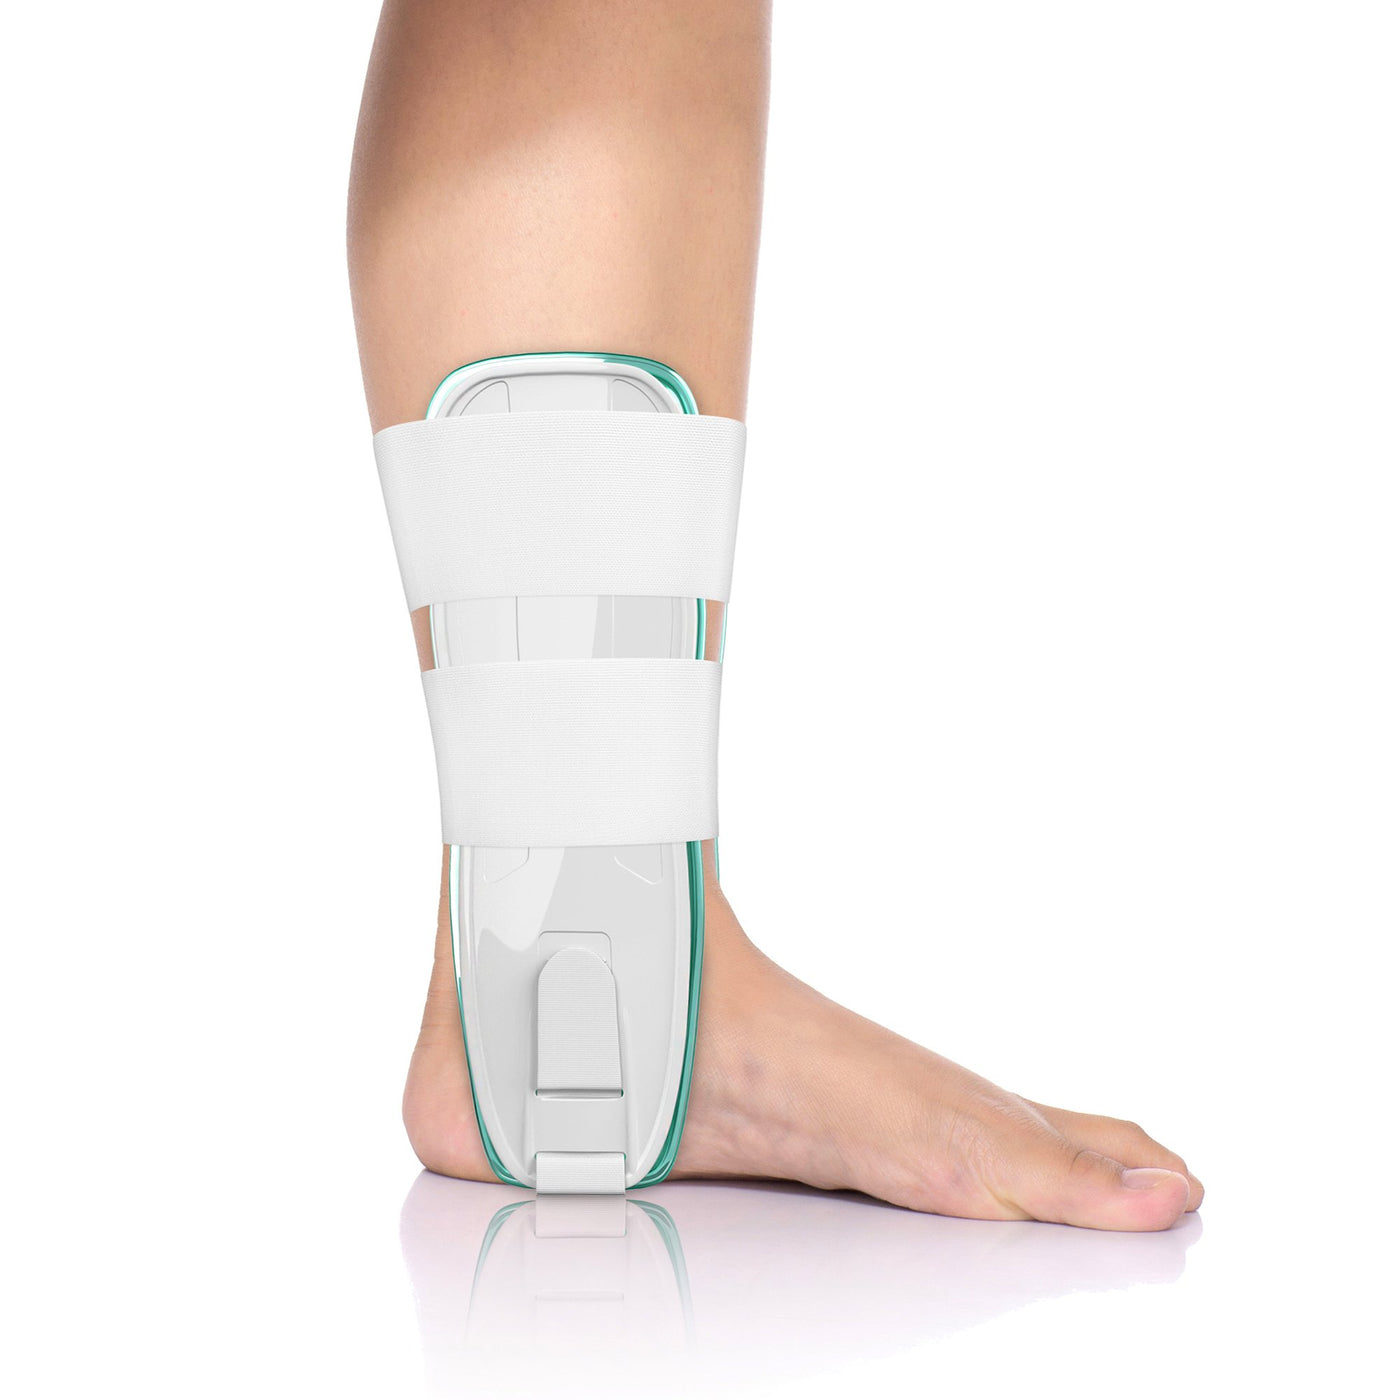 Malleostrong Ankle Brace - Large Left from Essential Aids